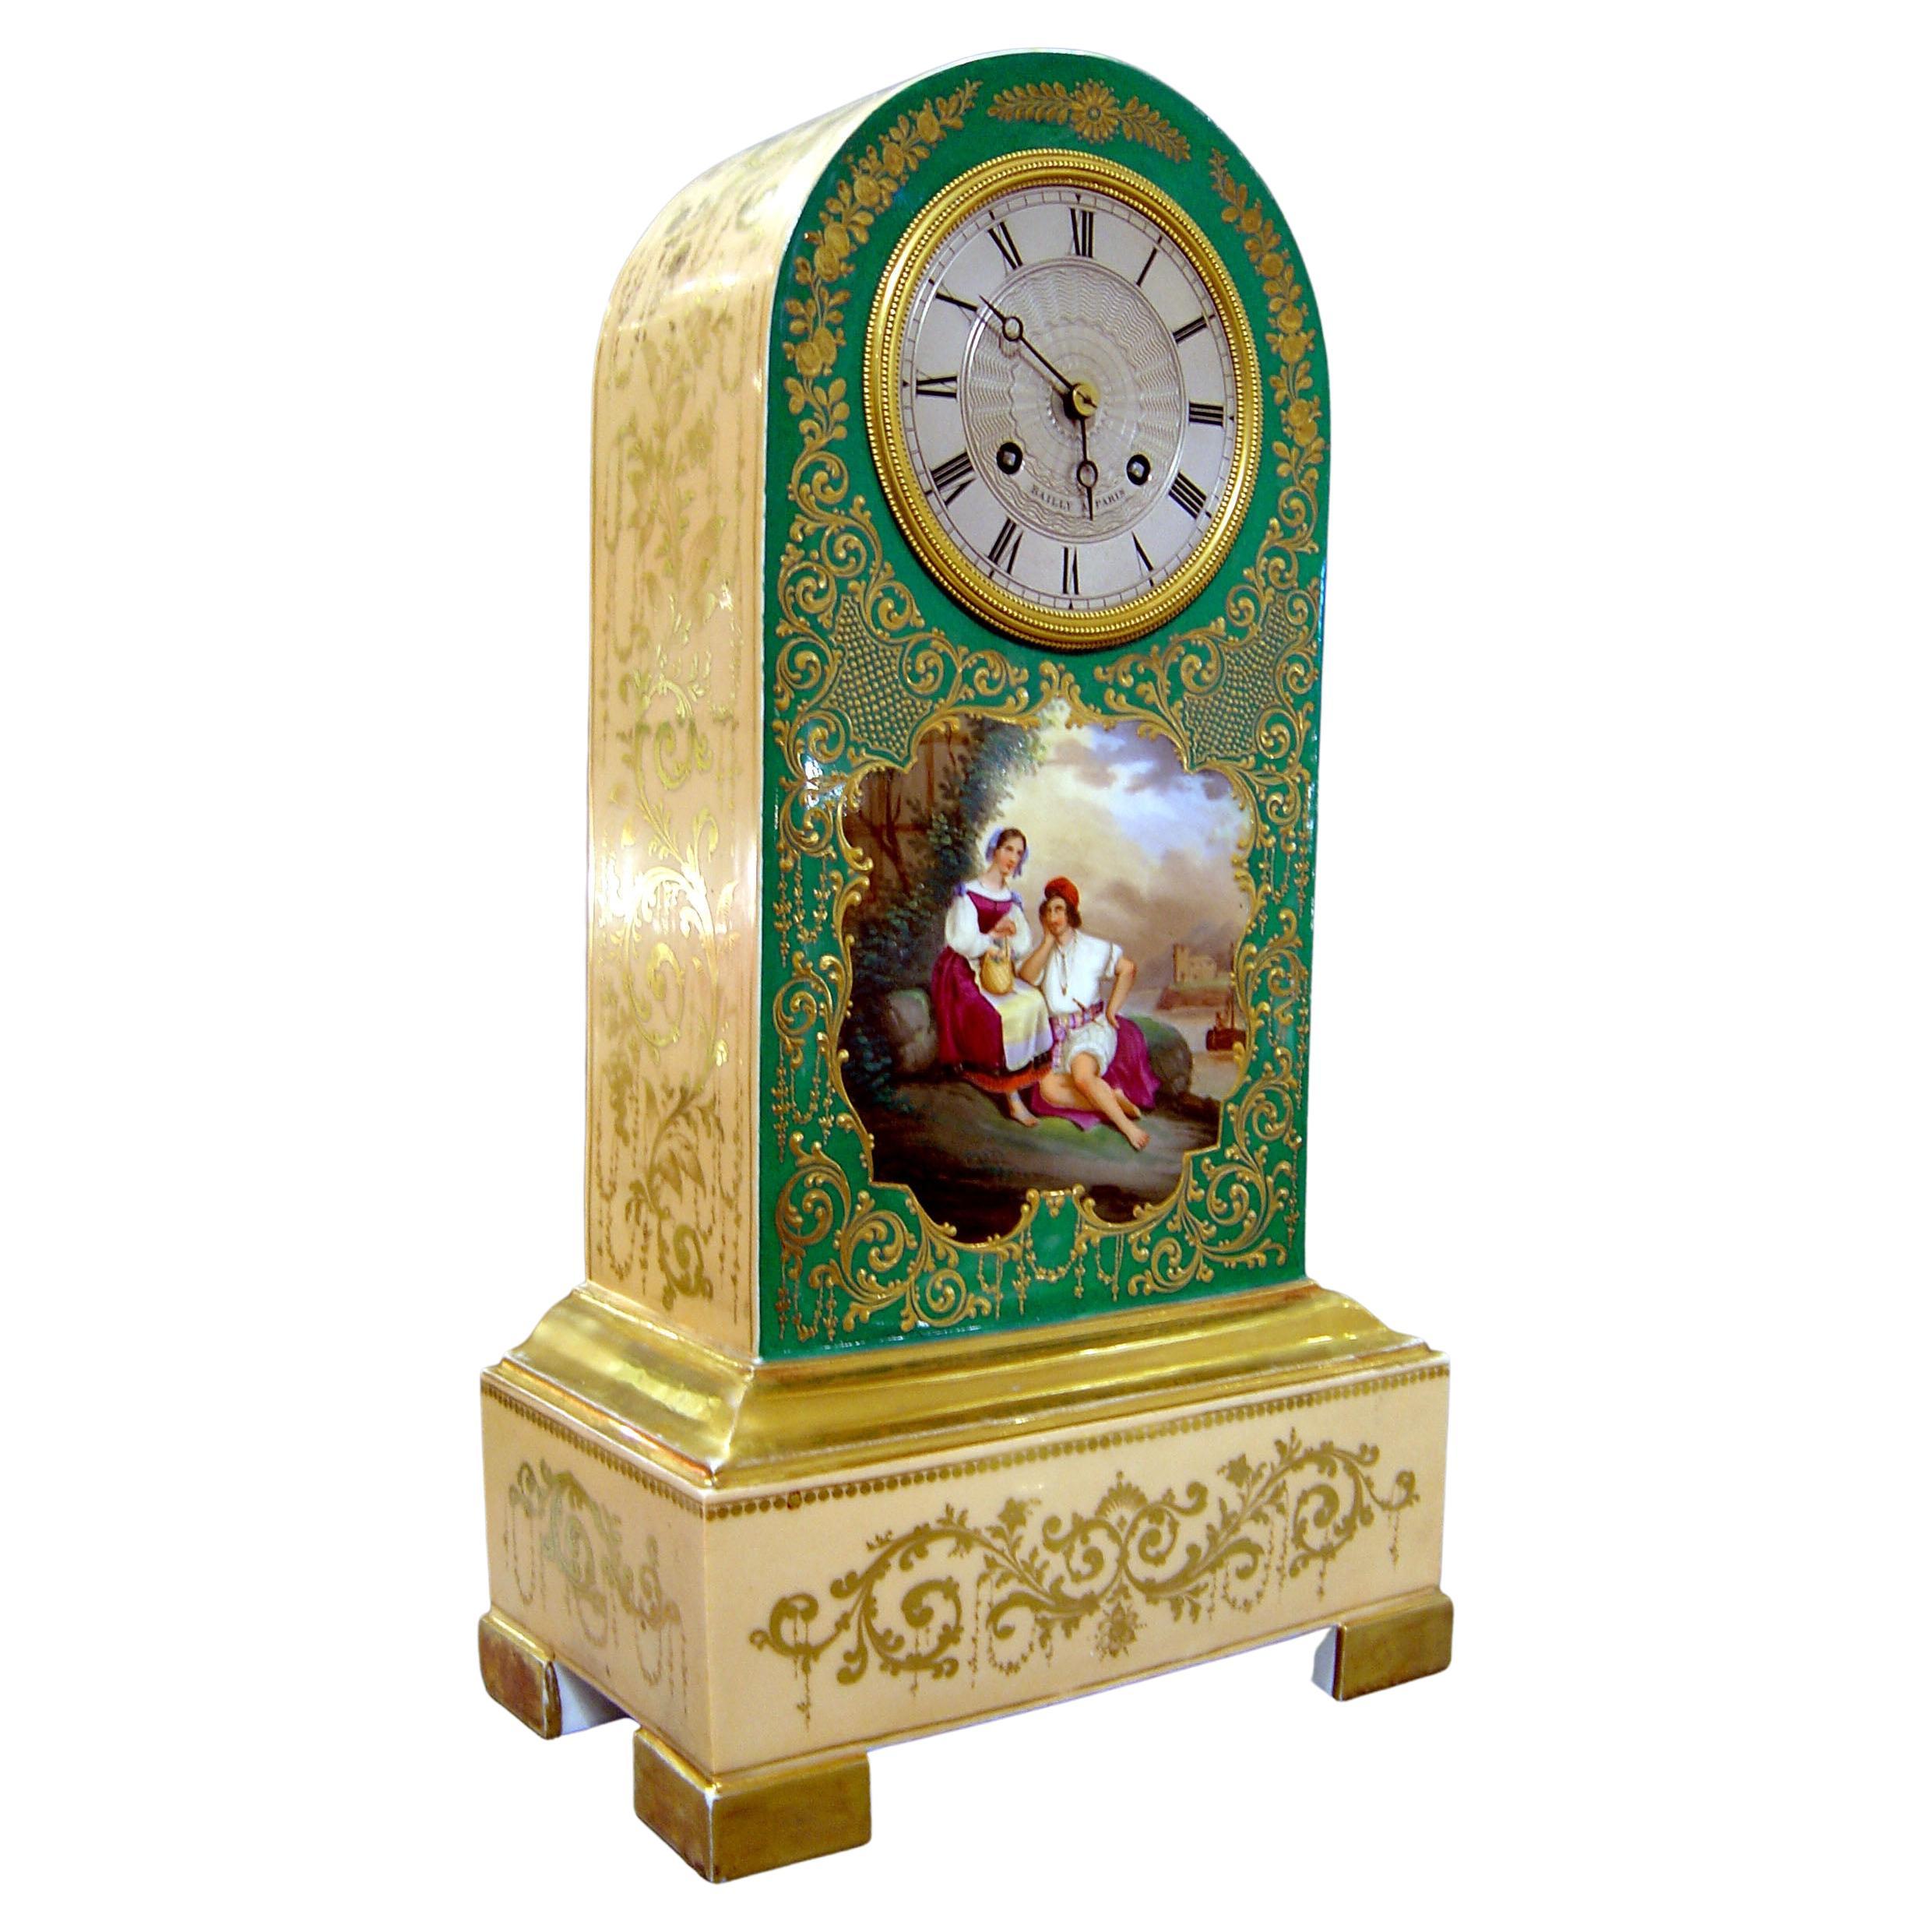 French Charles X Period Porcelain Borne Clock